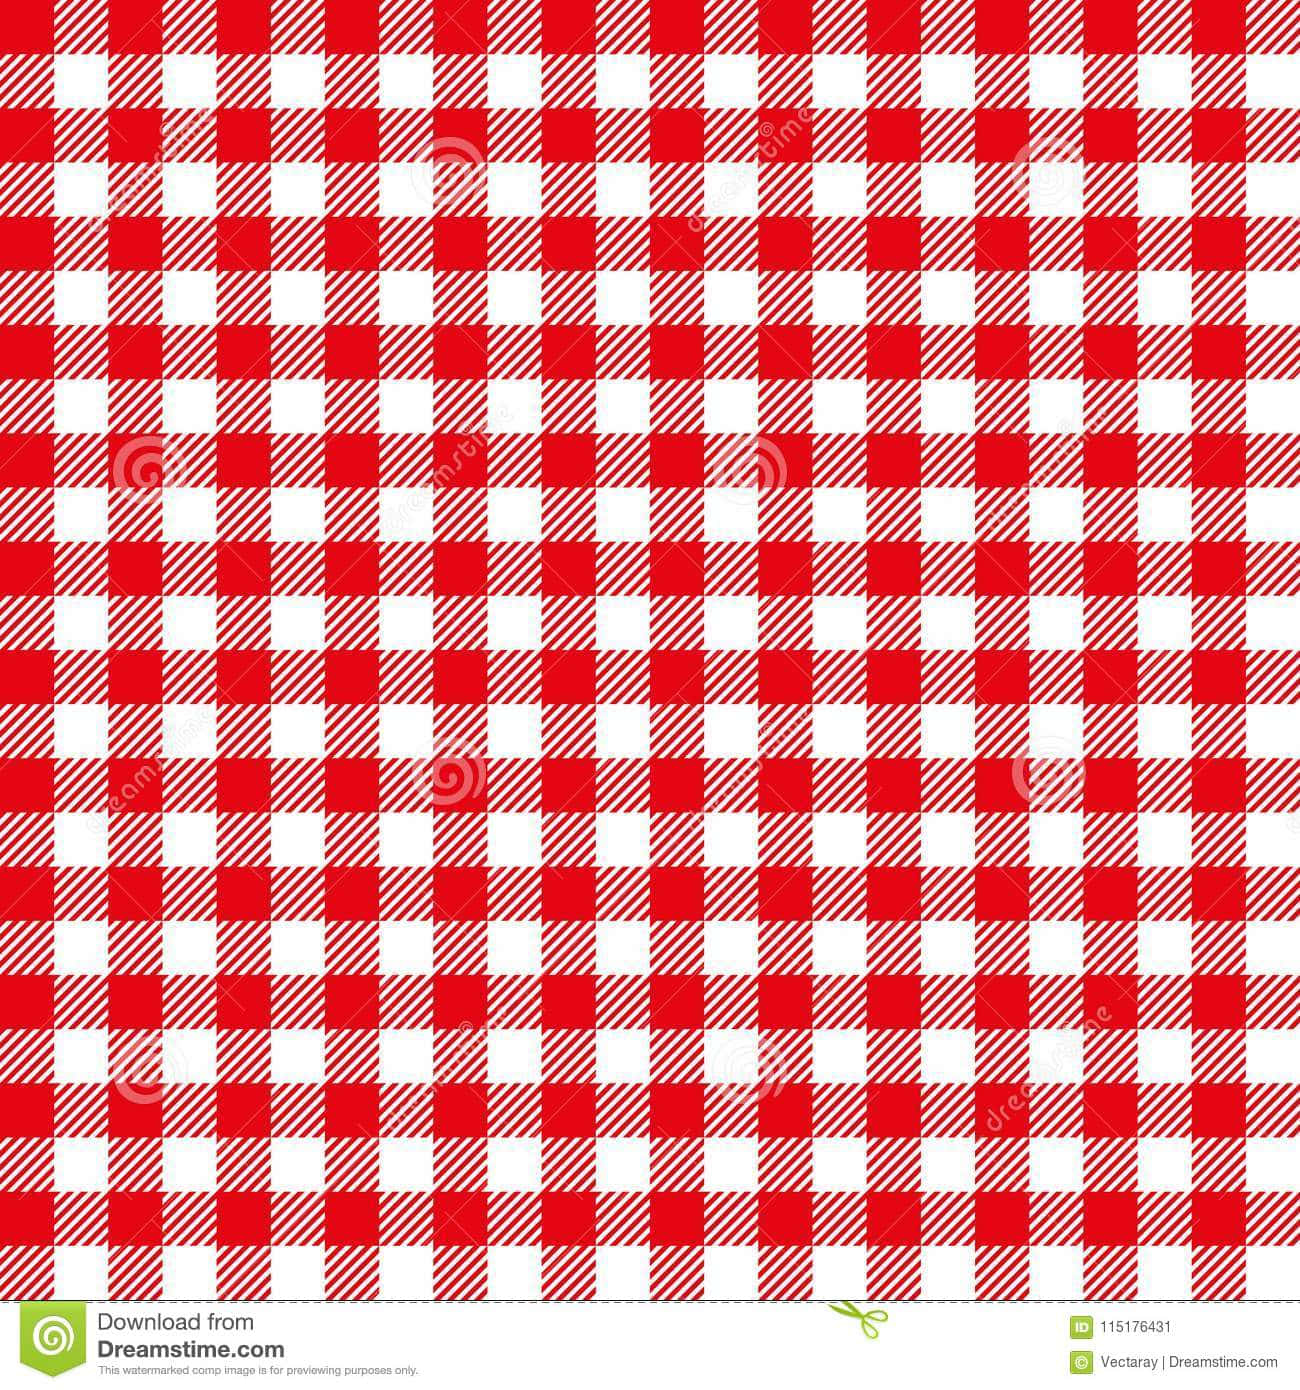 Check out this fashionable red checkered pattern look Wallpaper